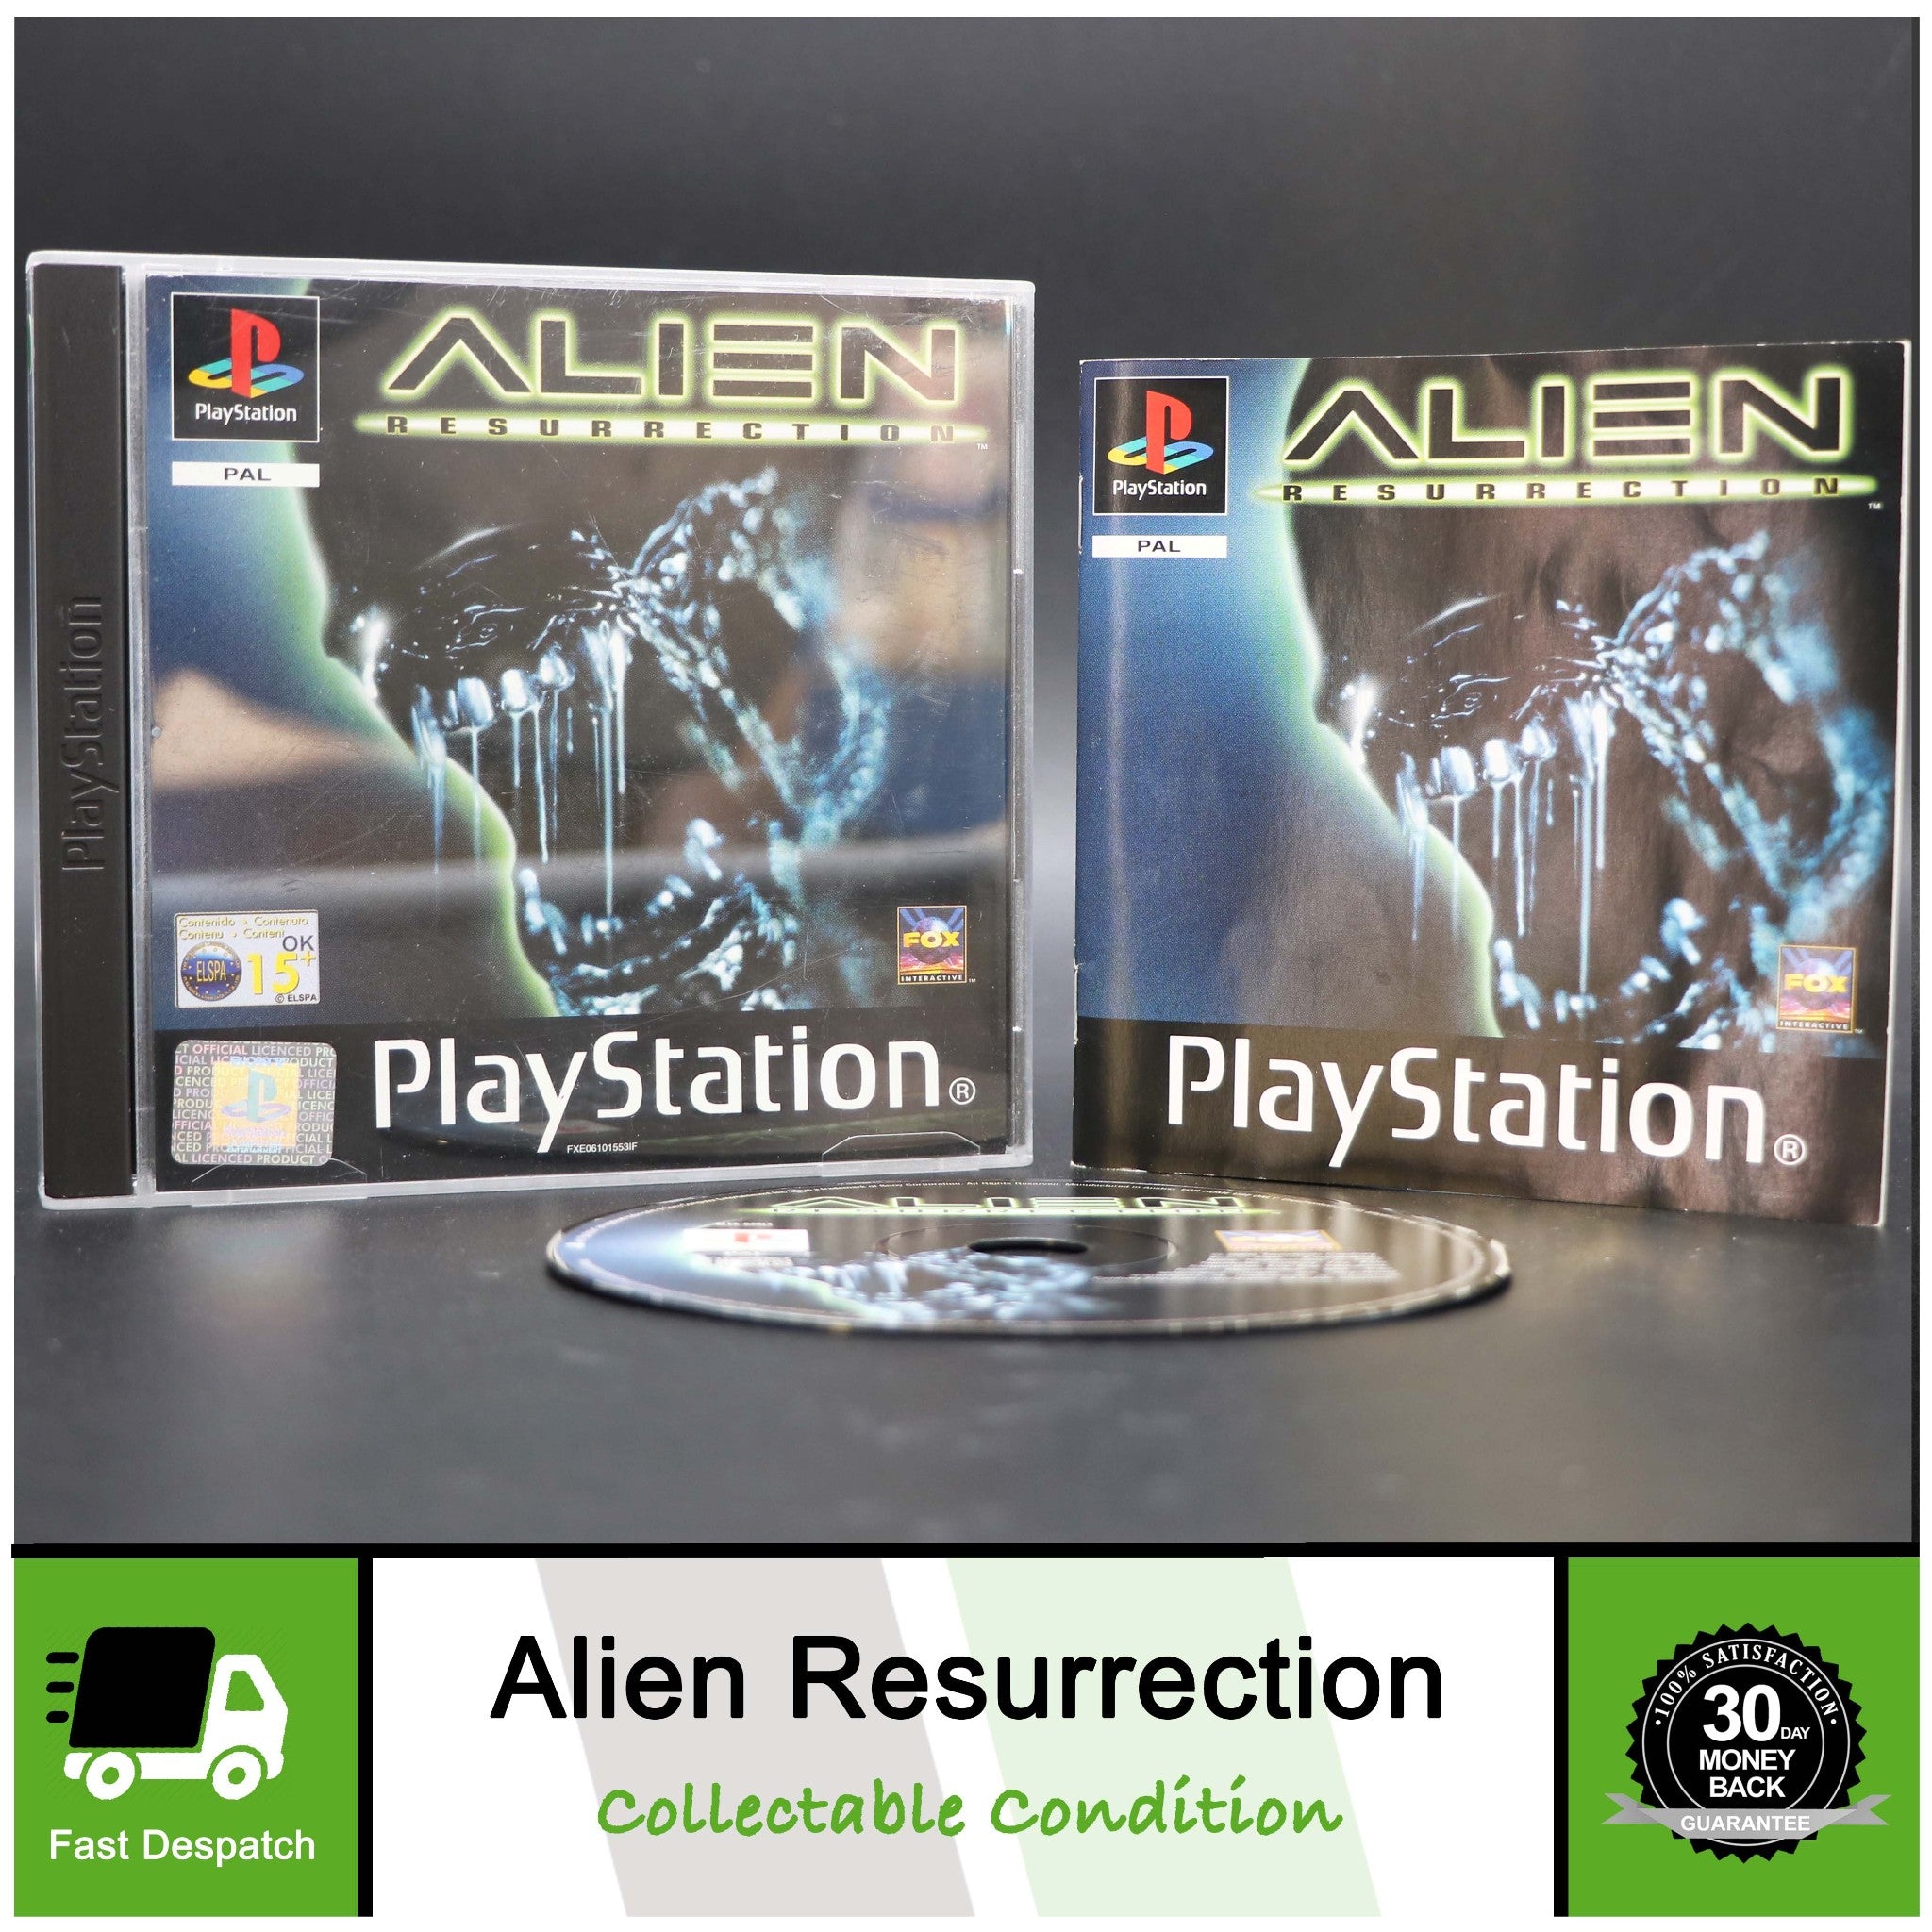 Alien Resurrection - Sony Playstation PSONE PS1 Game - Collectable Condition!